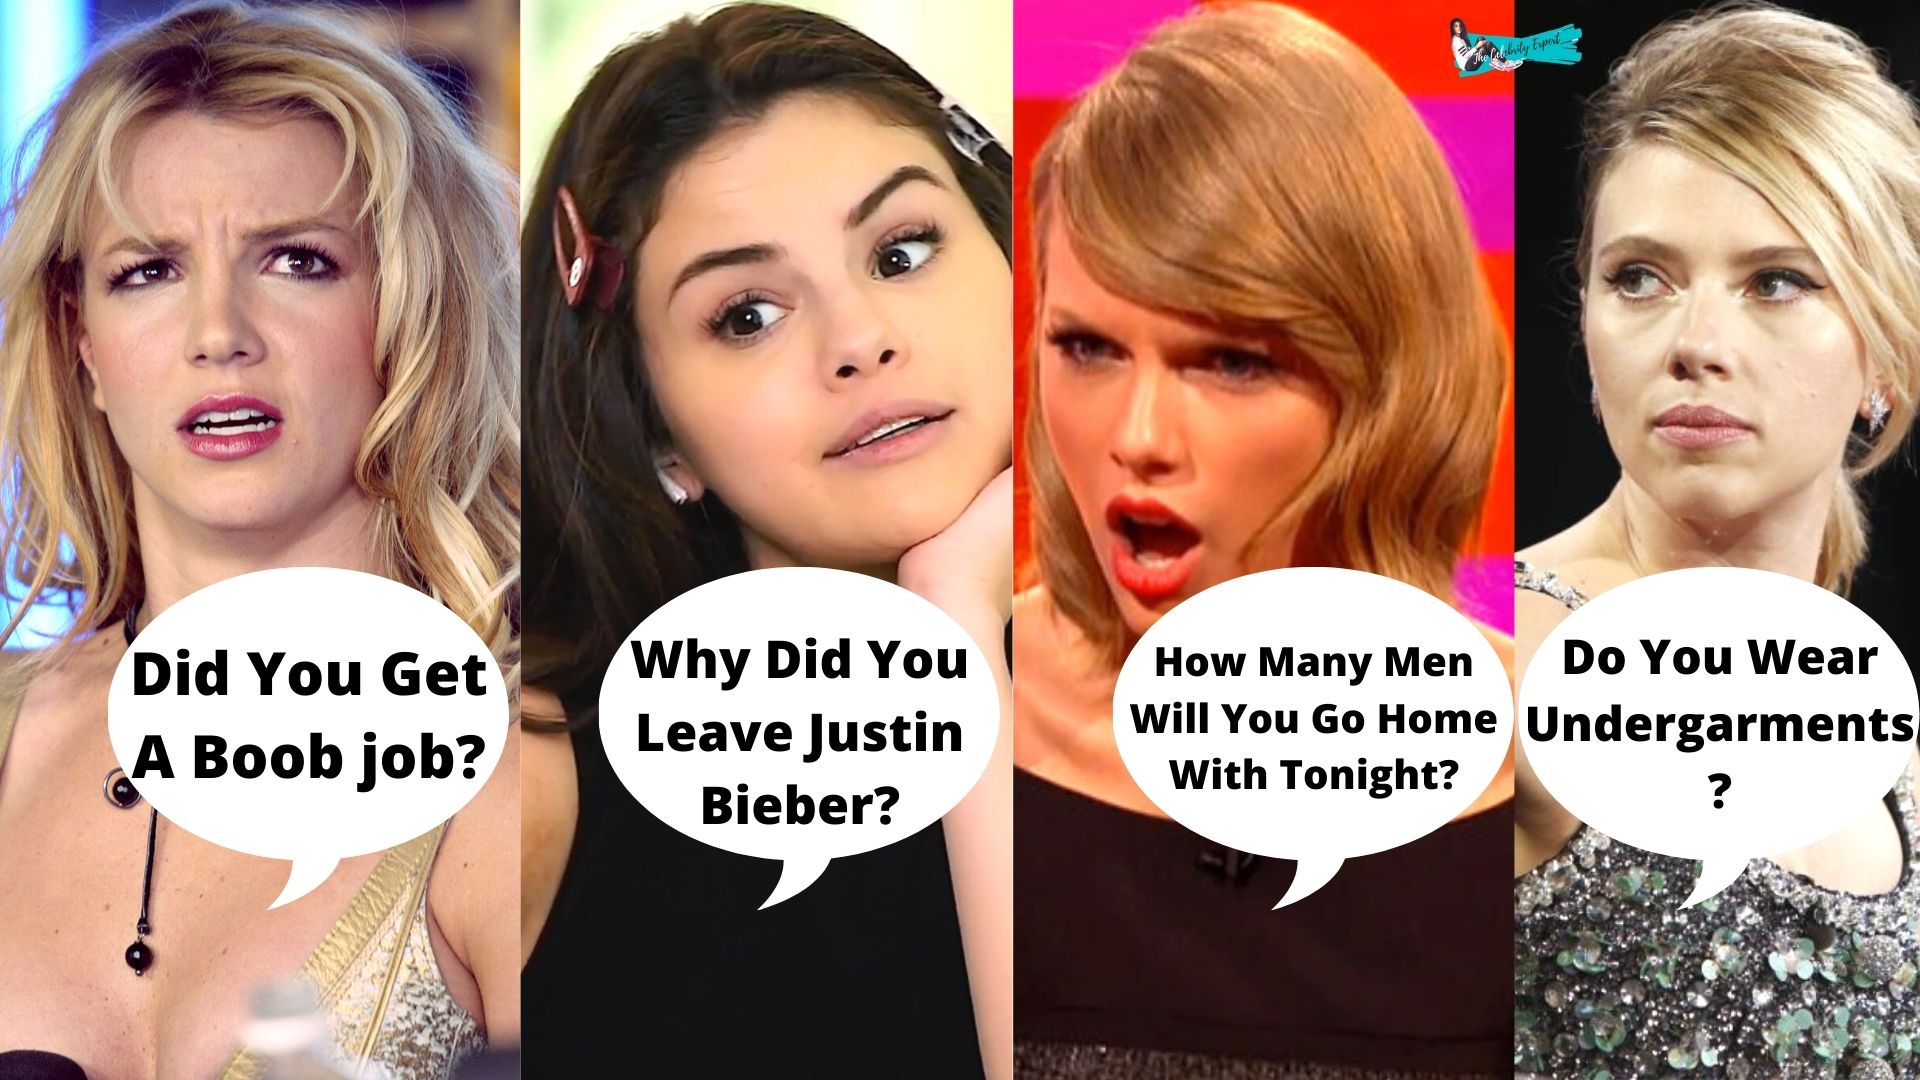 Female Celebrities Being Asked Sexist Questions